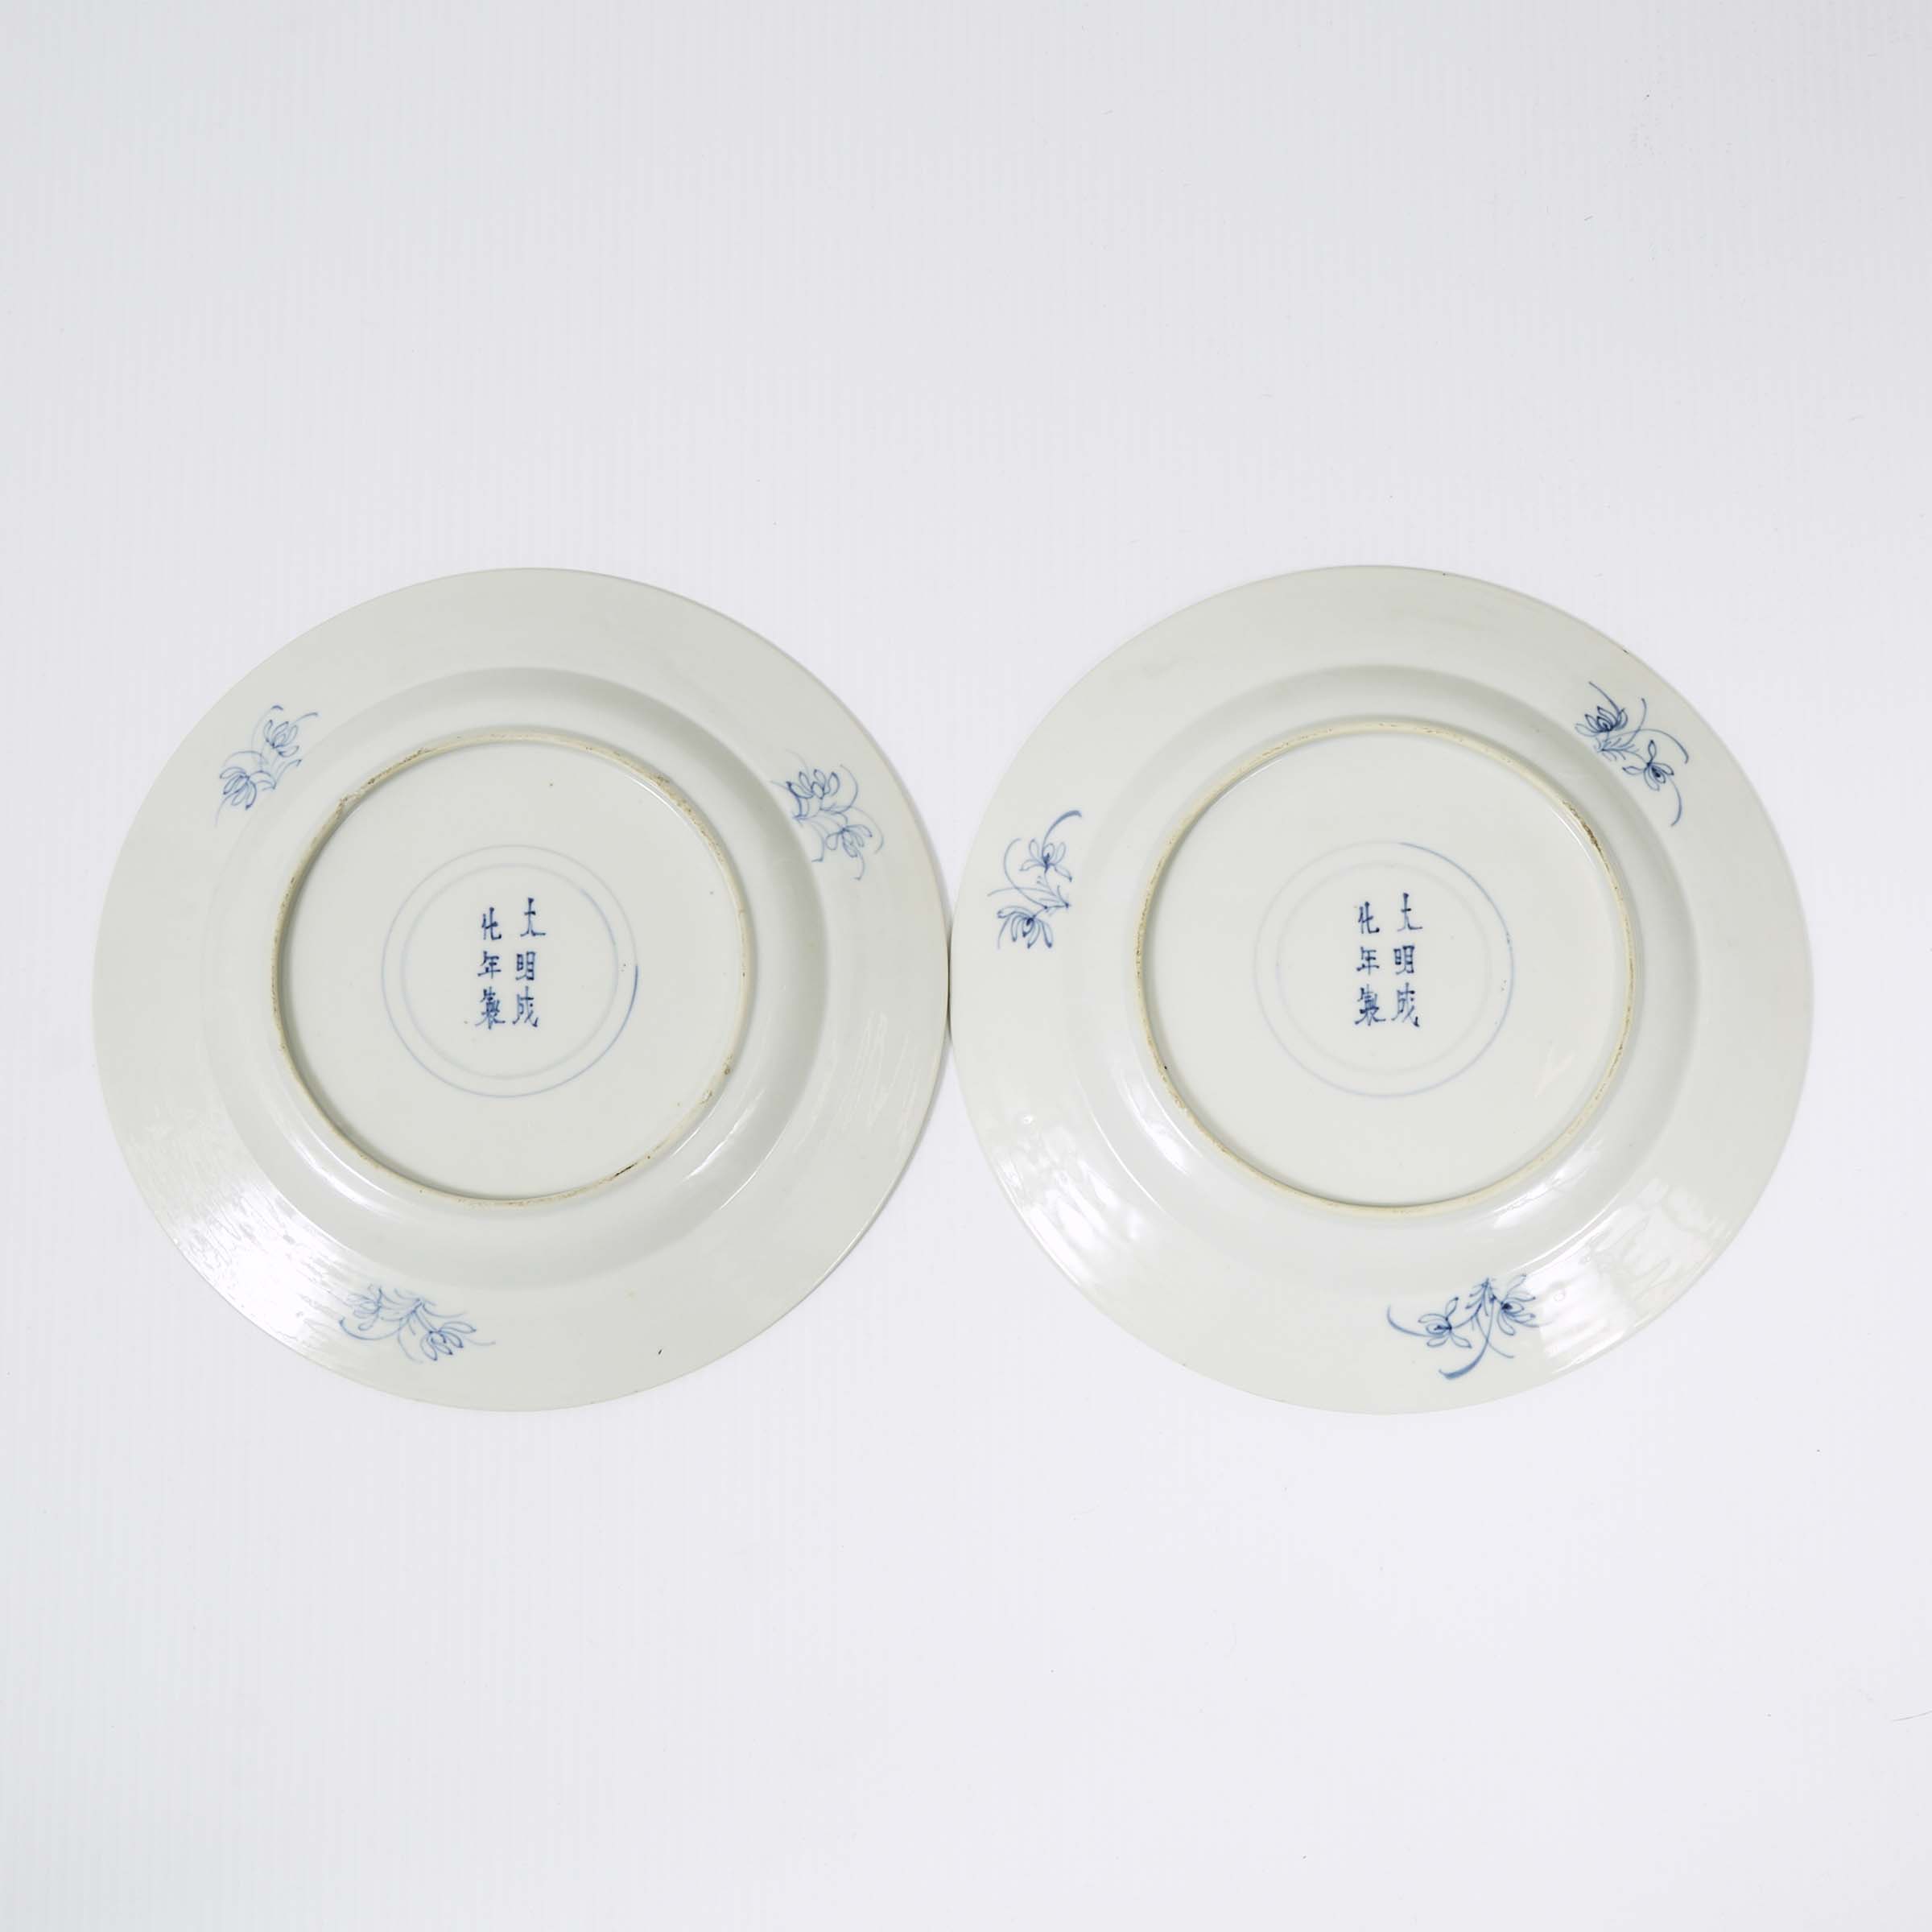 A Pair of Blue and White 'Water Buffalo' Plates, 18th Century